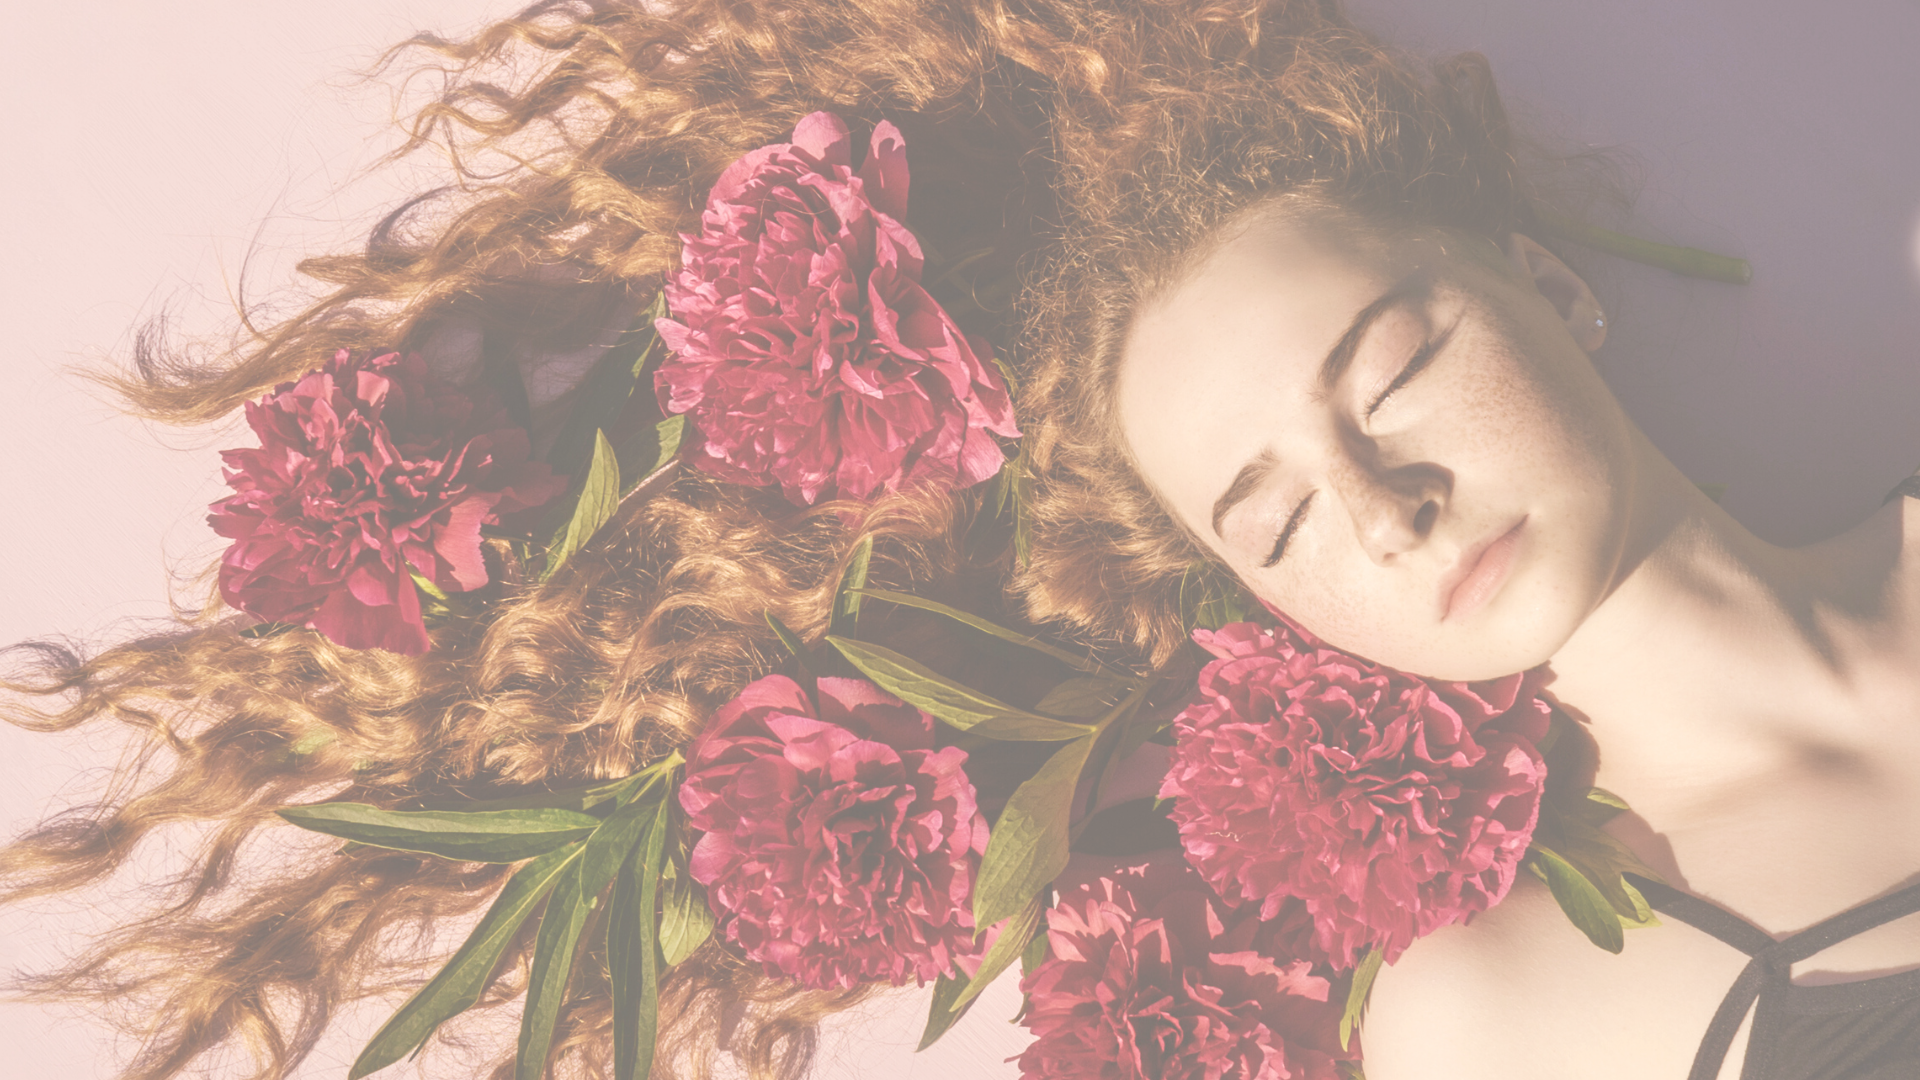 7 Ways to Keep Your Red Hair Smelling Good